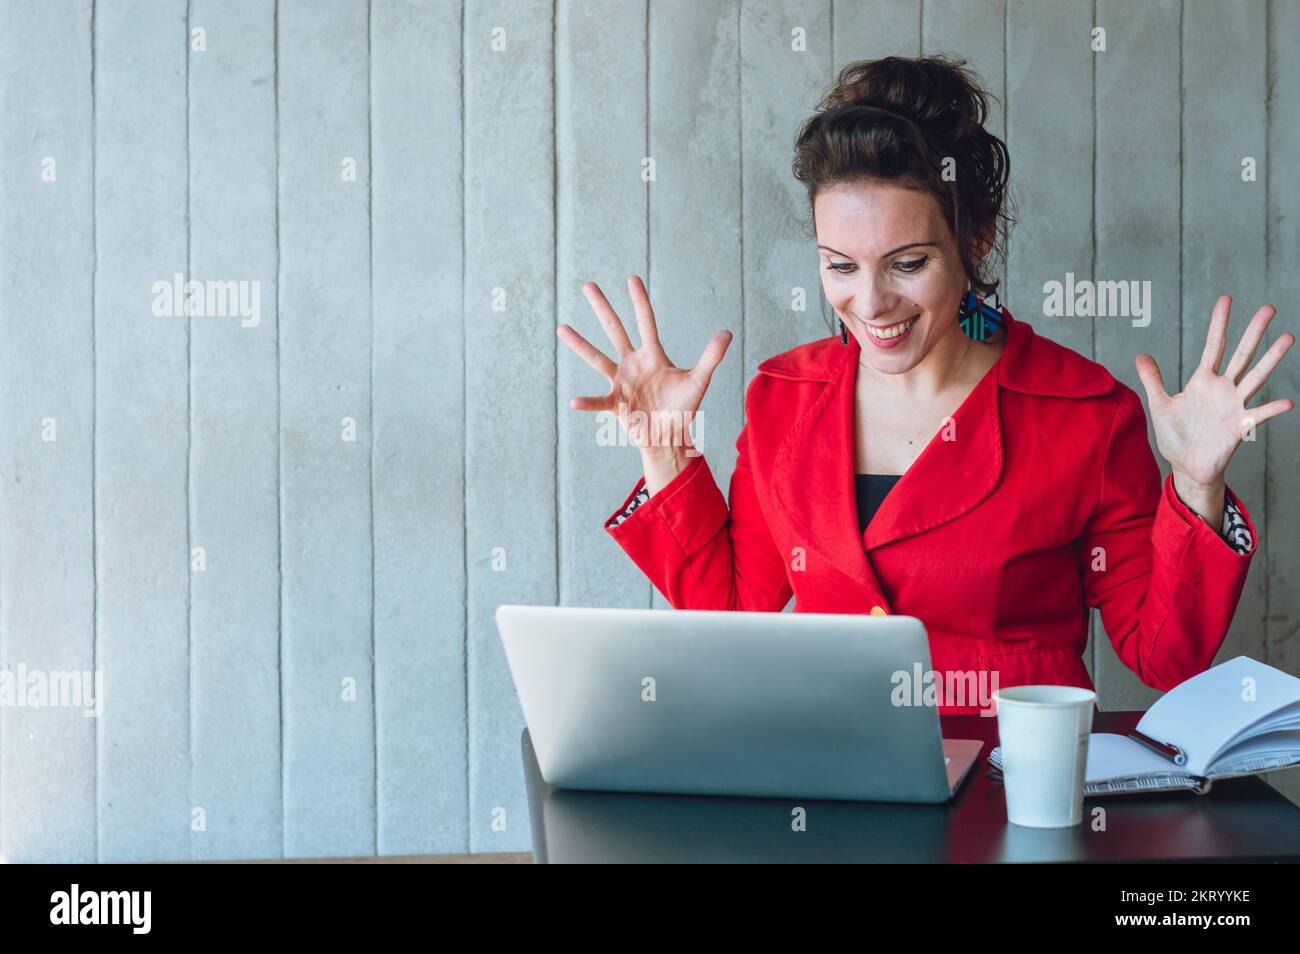 Caucasian adult female executive reacting happily with her hands raised and open, smiling as she works on her laptop, sitting in a coffee shop. Stock Photo